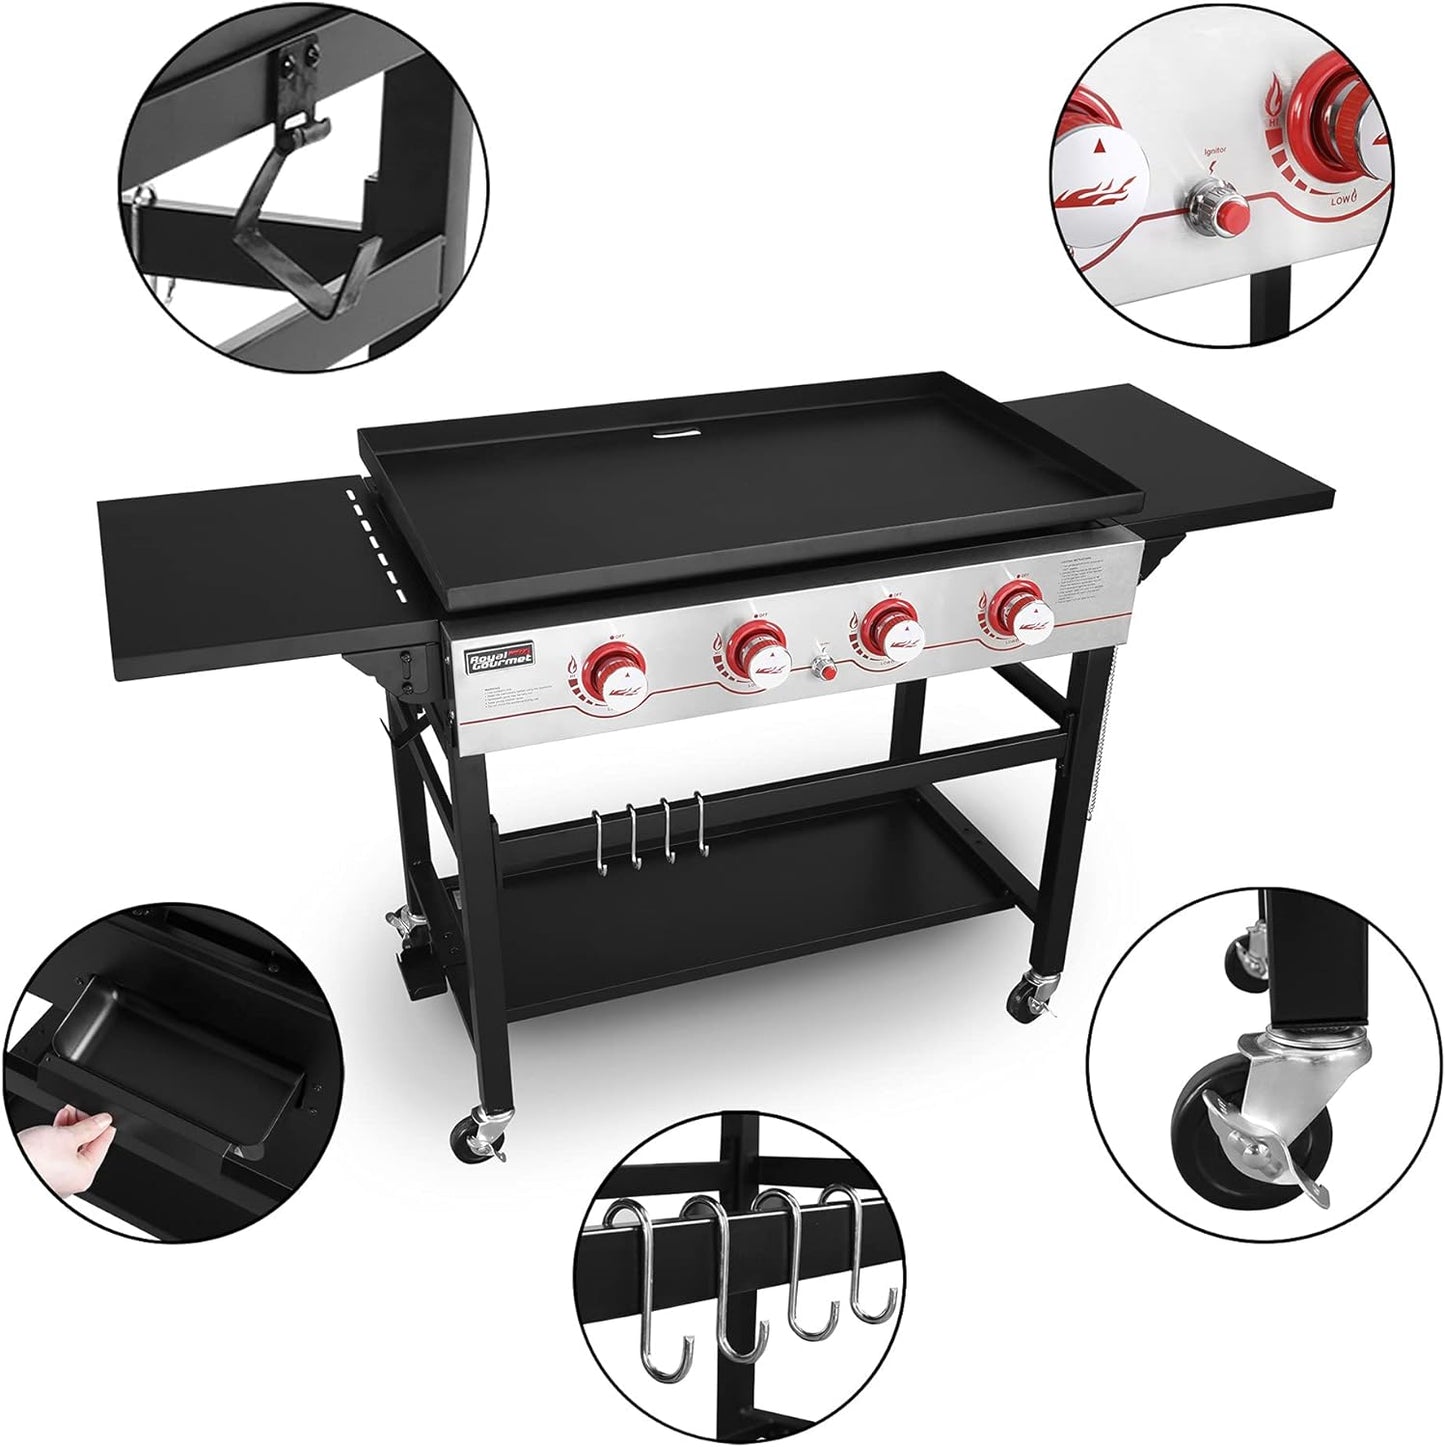 GB4000 36-Inch 4-Burner Flat Top Propane Gas Grill Griddle, for BBQ, Camping, Red